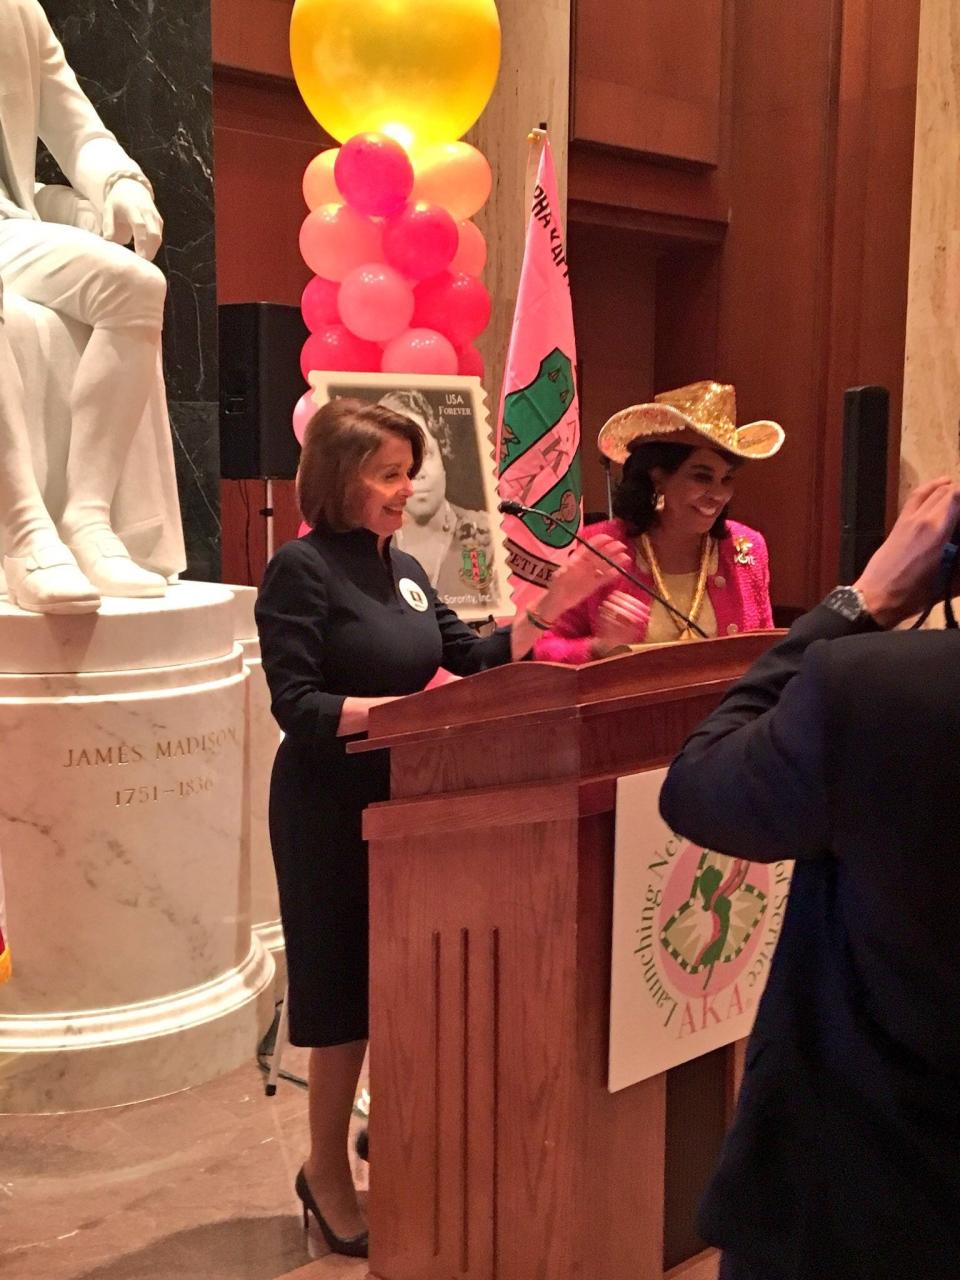 Then-House Minority Leader Nancy Pelosi and Rep. Frederica Wilson, D-Fla., at the Library of Congress on Feb. 15, 2018, in Washington, D.C.